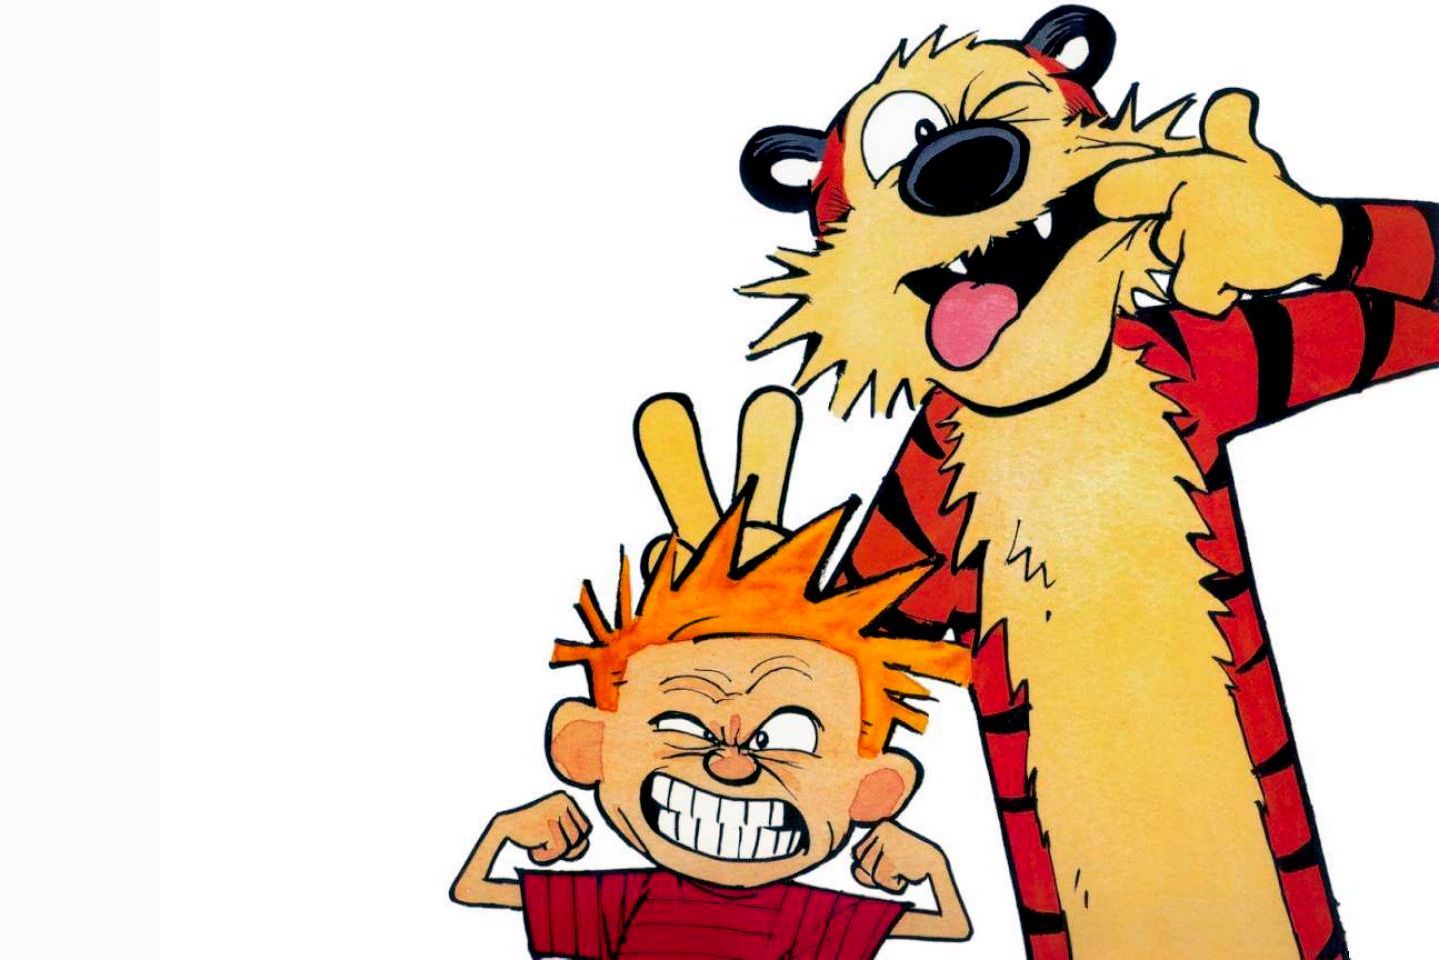 Calvin and hobbes wallpaper - (#179898) - High Quality and ...